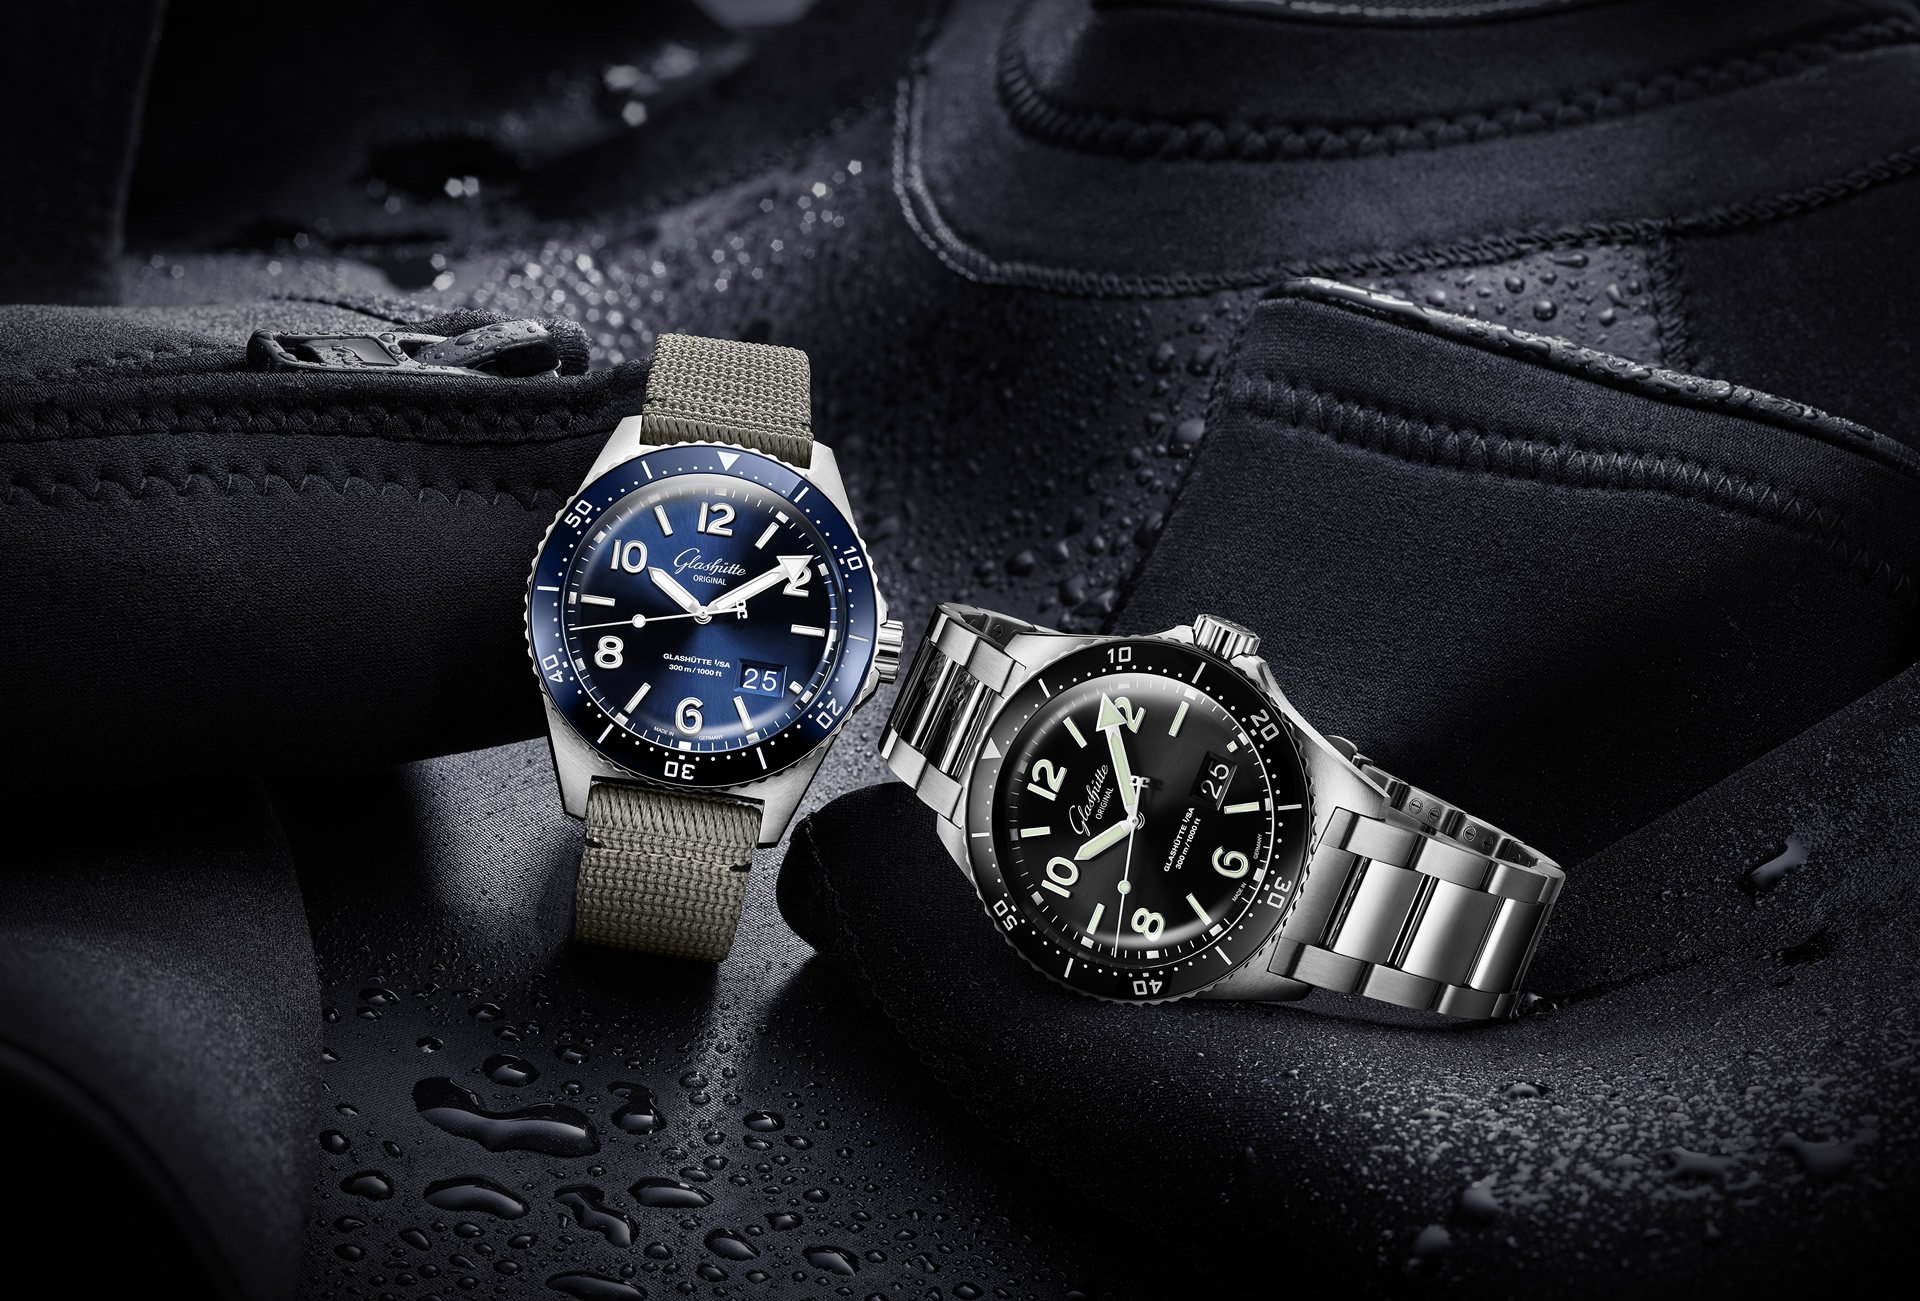 SeaQ revives tradition of diver’s watches made in Glashütte